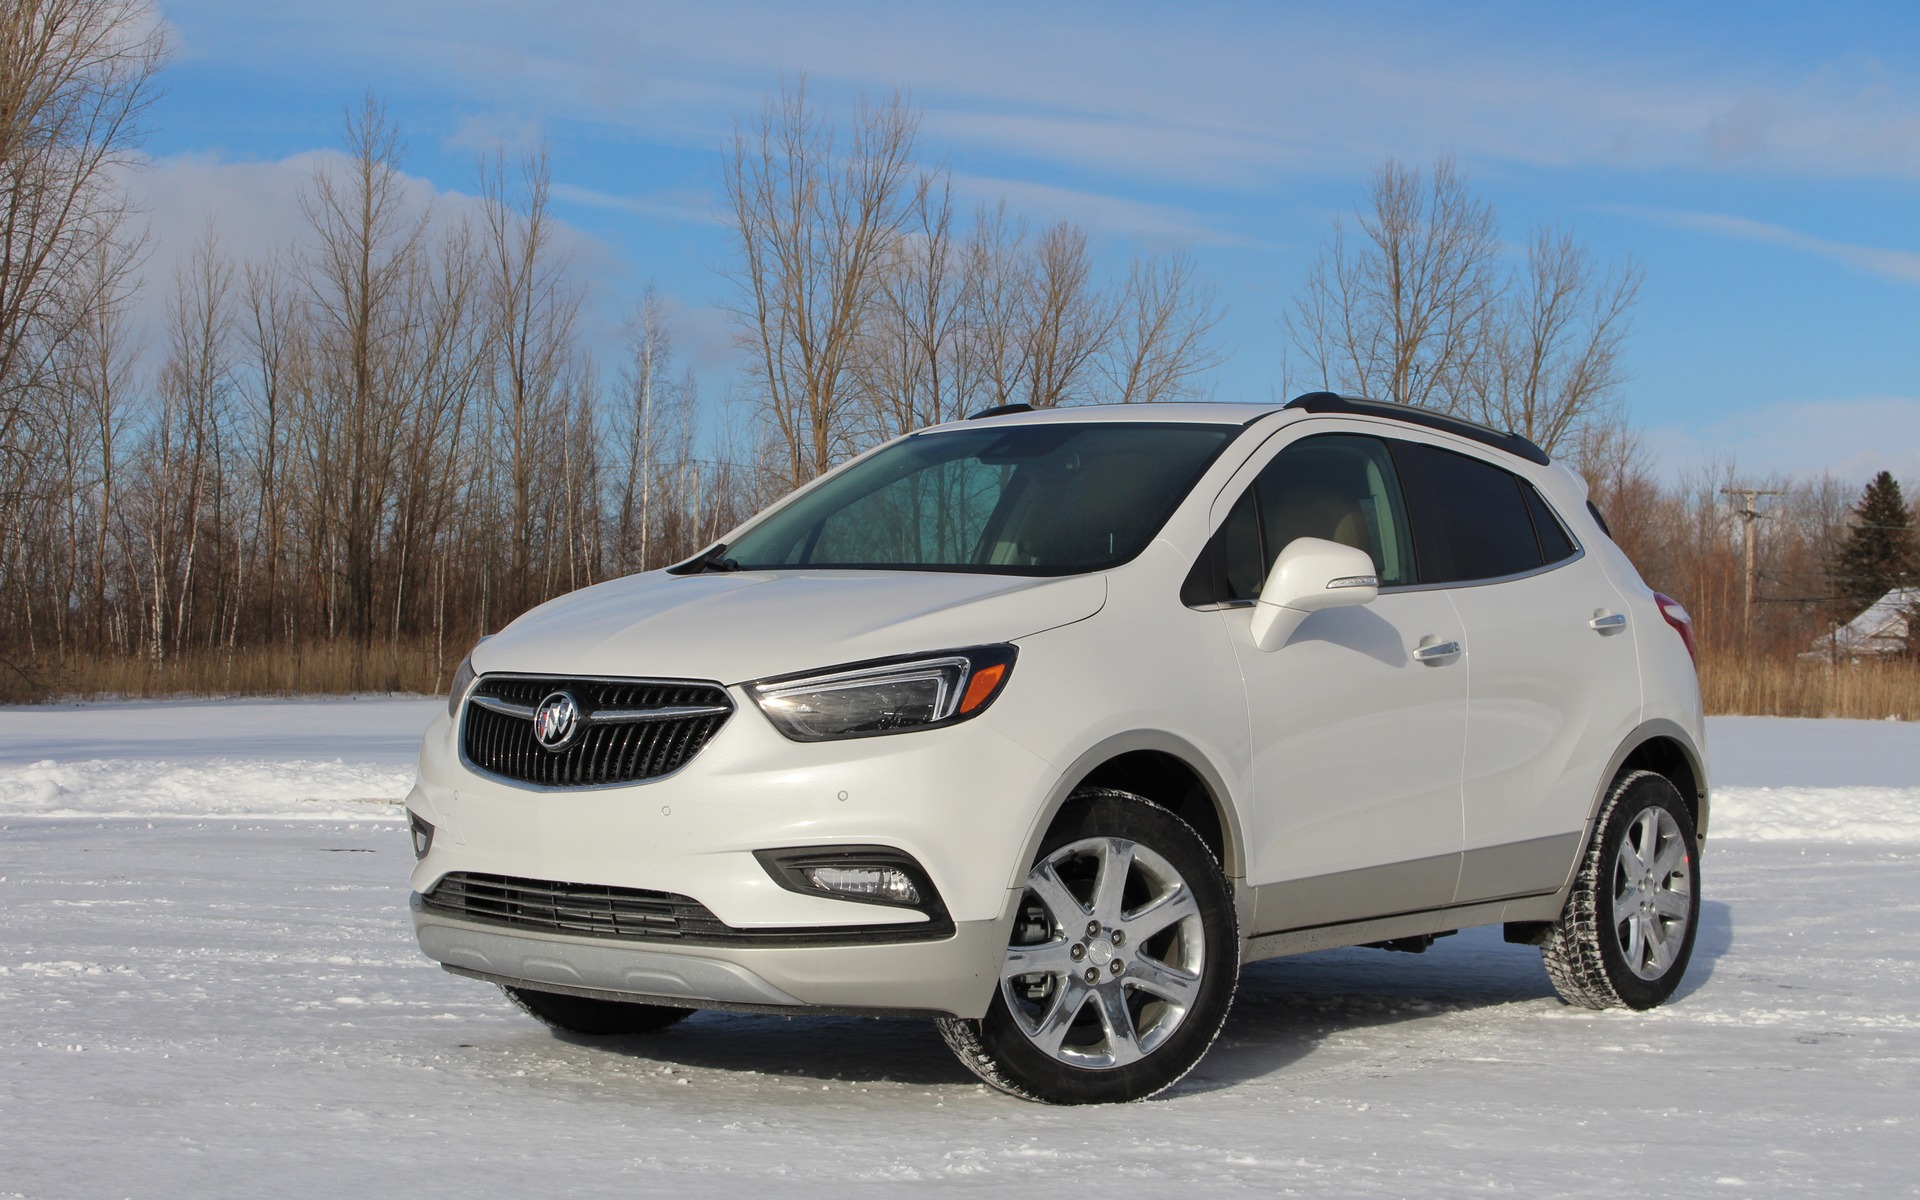 2017 Buick Encore: Time Doesn't Stand Still - TBNewsWatch.com